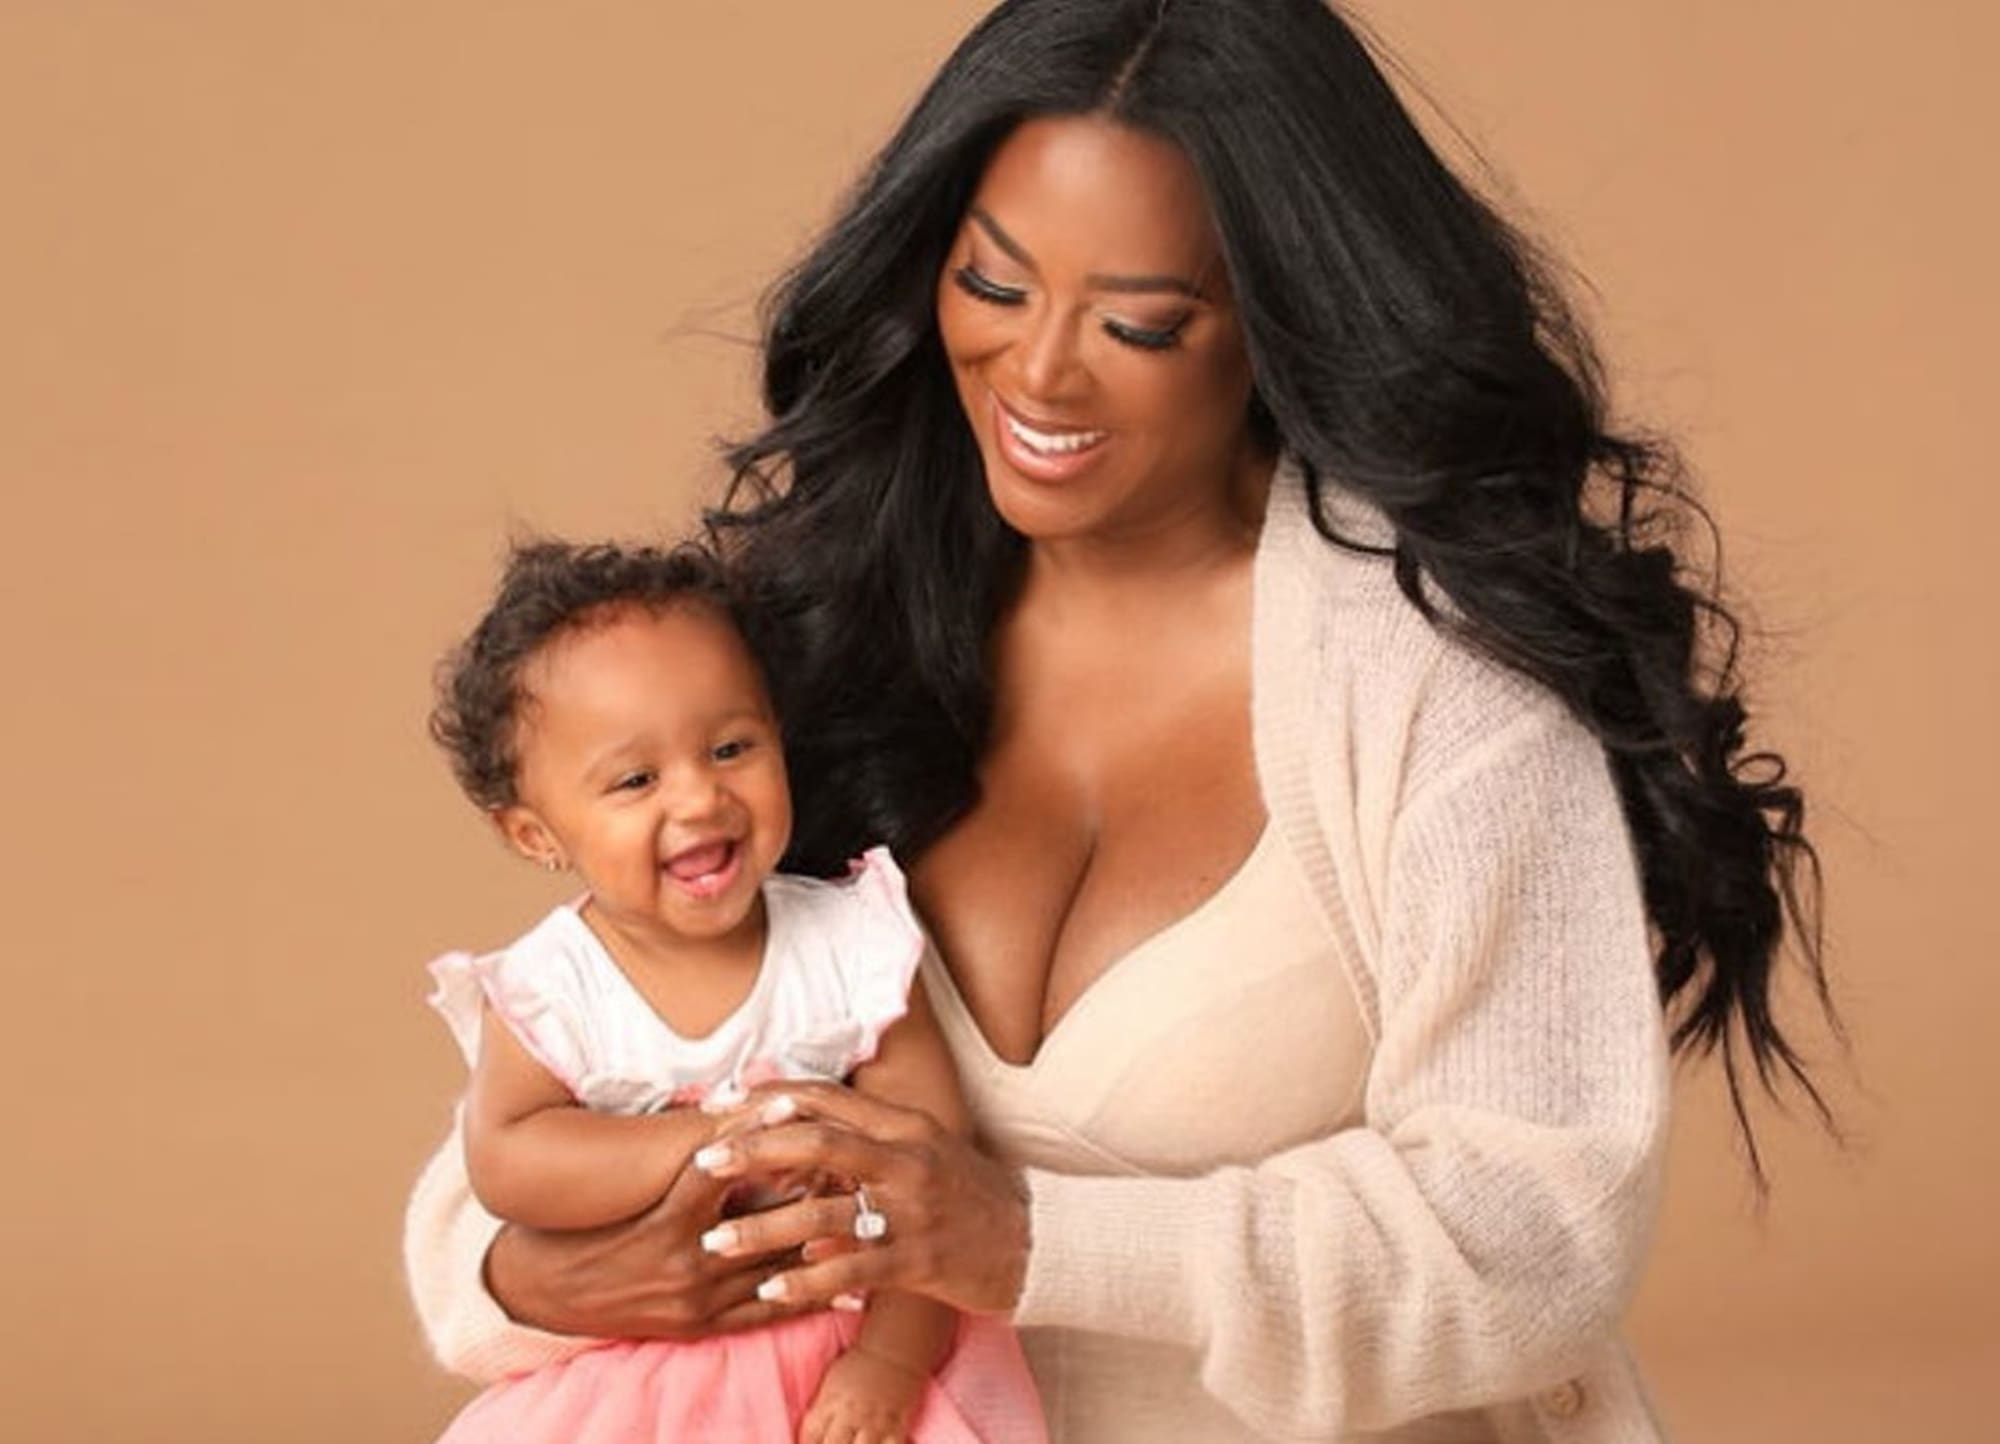 Kenya Moore Poses Only In Her Underwear And Fans Are Here For The Jaw-Dropping Photo